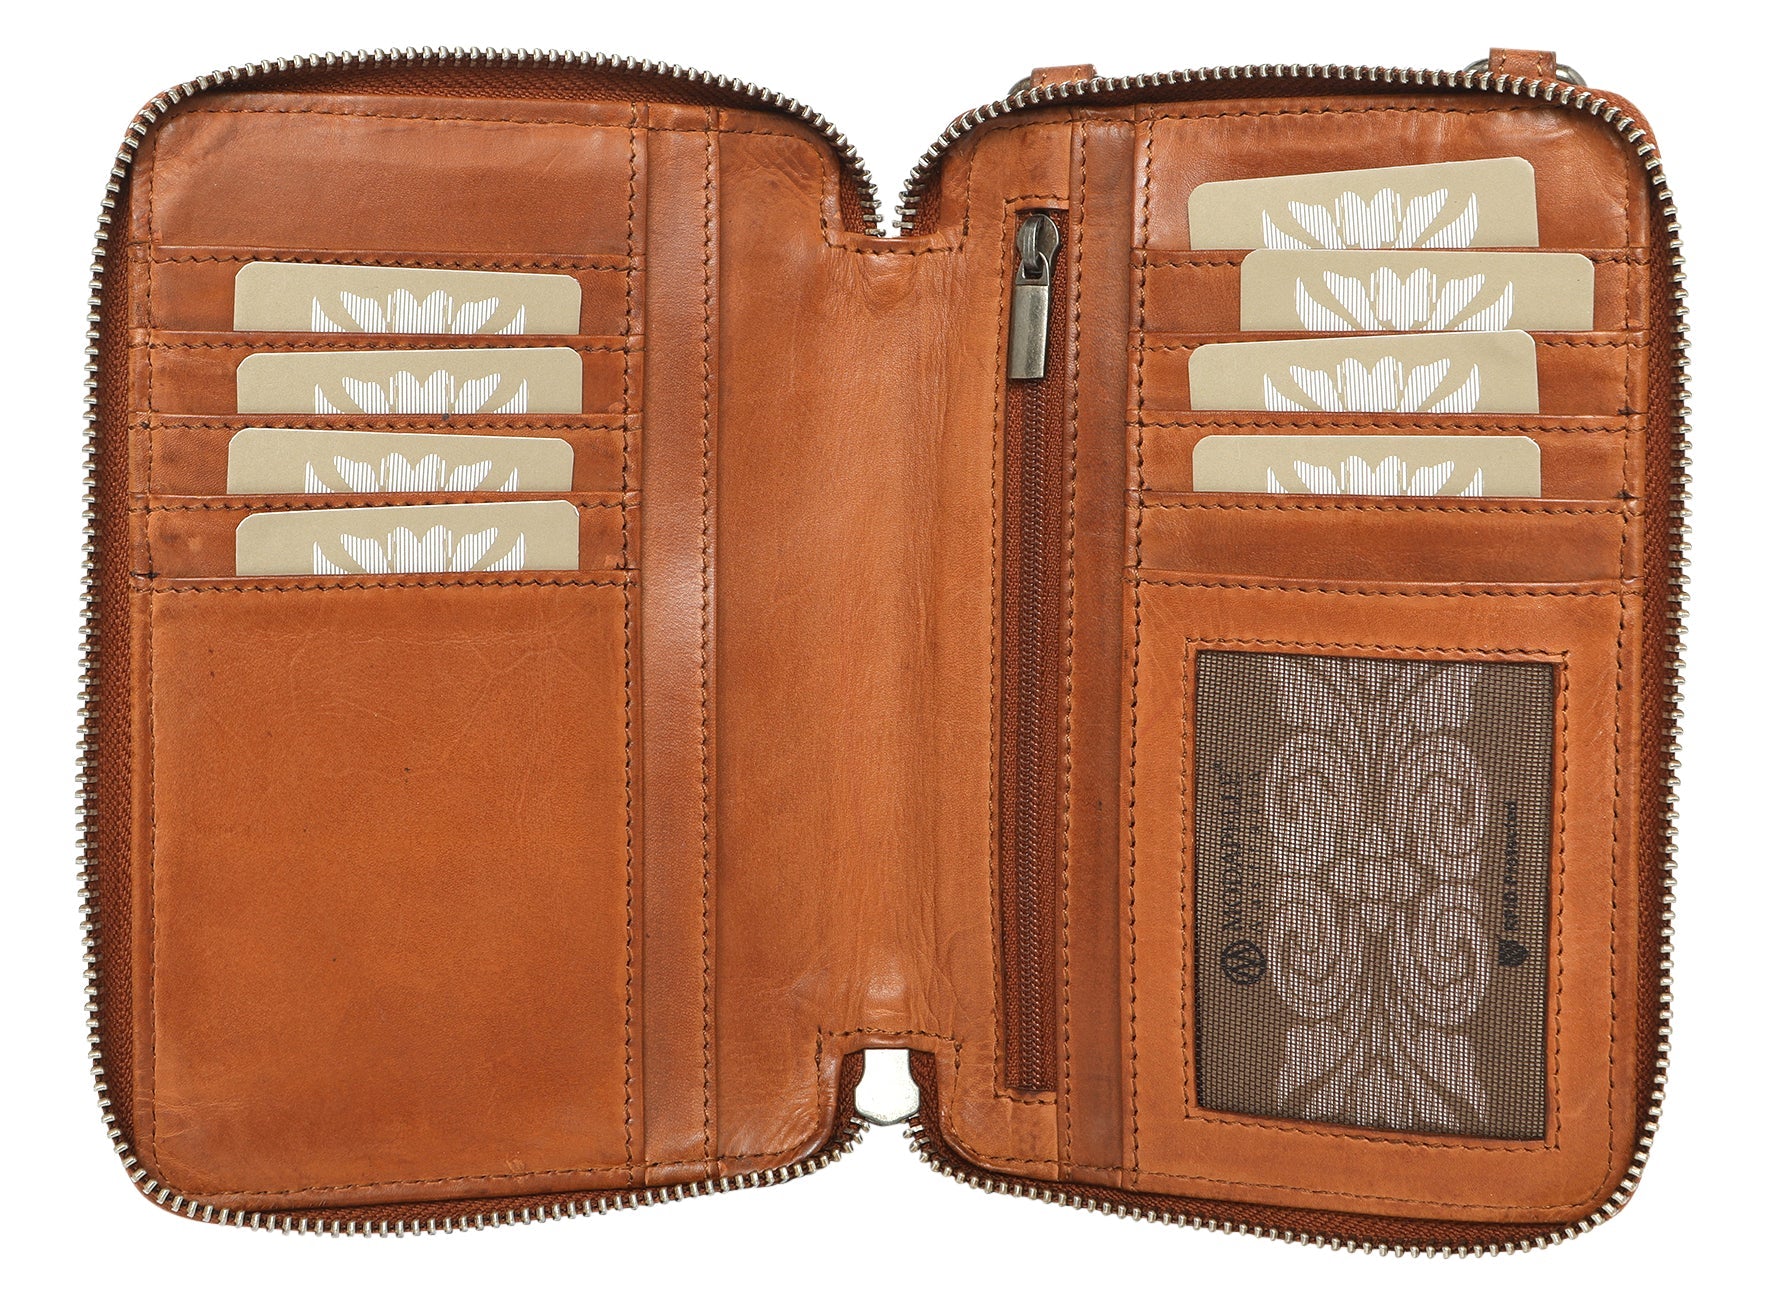 Leather Cross Body Organiser - Tan-Bags & Clutches-Modapelle-The Bay Room